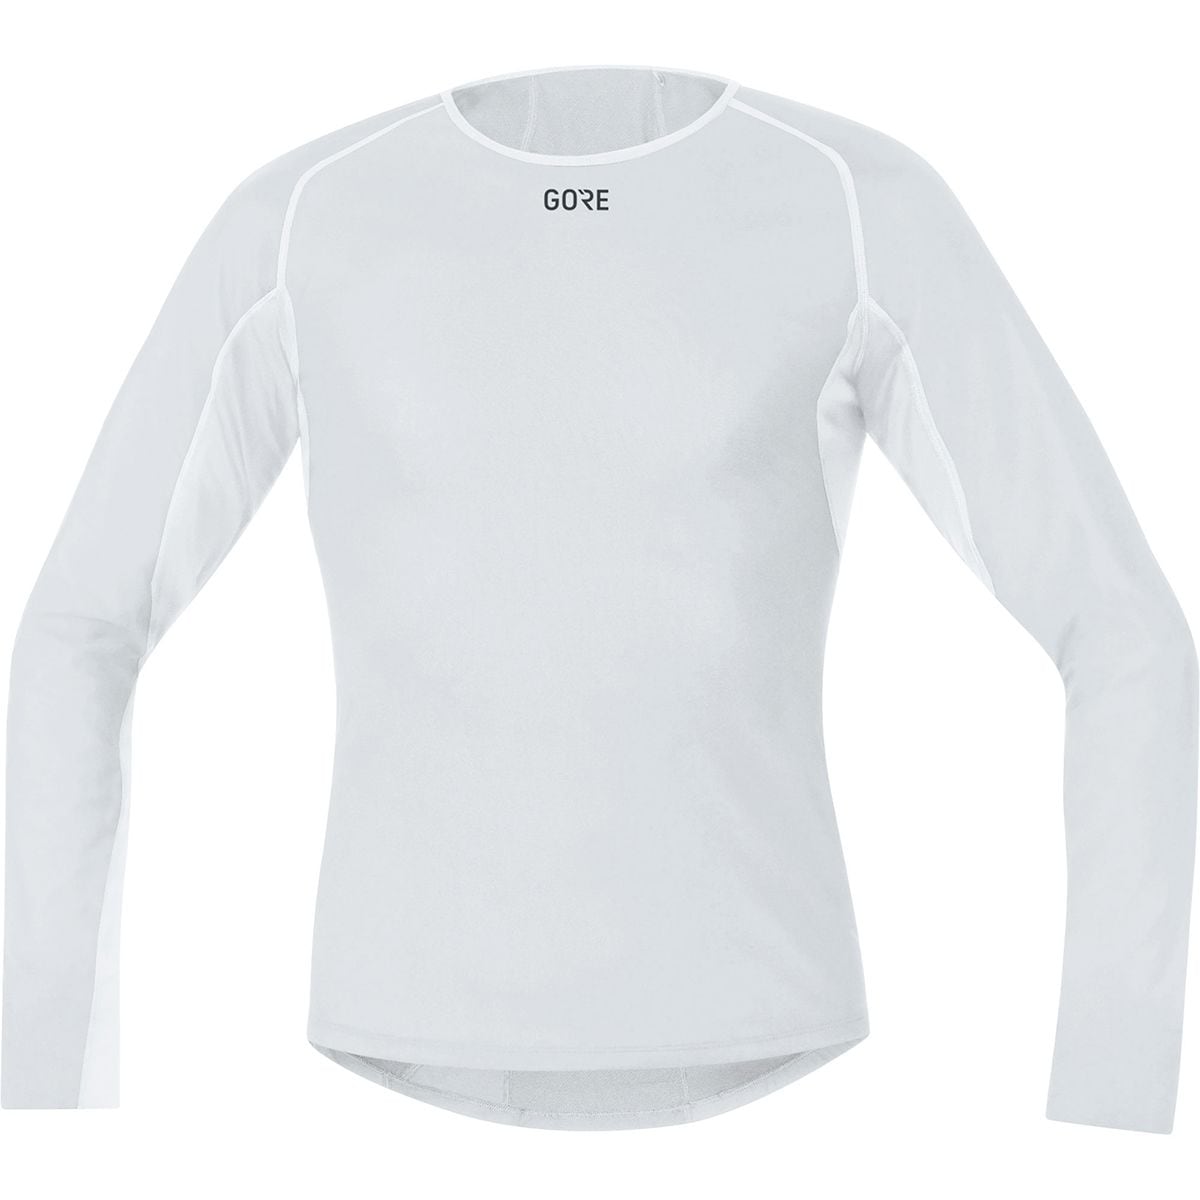 GOREWEAR Windstopper Base Layer Thermo Long-Sleeve Shirt - Men's